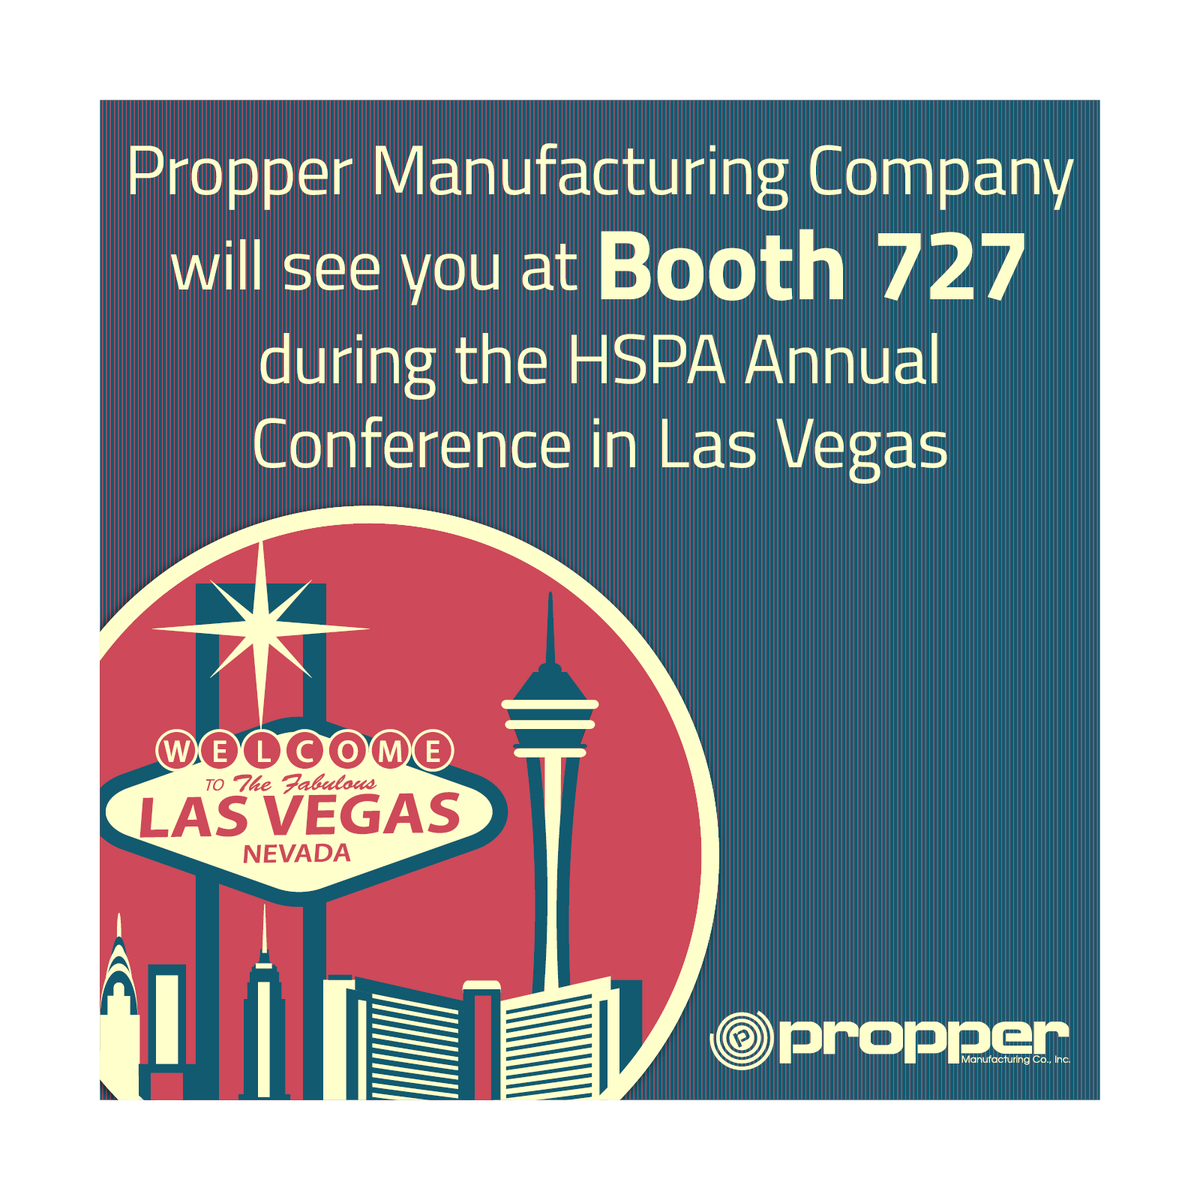 Join us at #HSPAConference for the latest in #HealthcareInnovation & #SterileProcessing. Visit booth 727 to connect with #PropperMfg, explore products, & learn about #PropperAcademy. Let's shape the future together in #LasVegas April 21-23, 2024. #Networking #IndustryLeaders